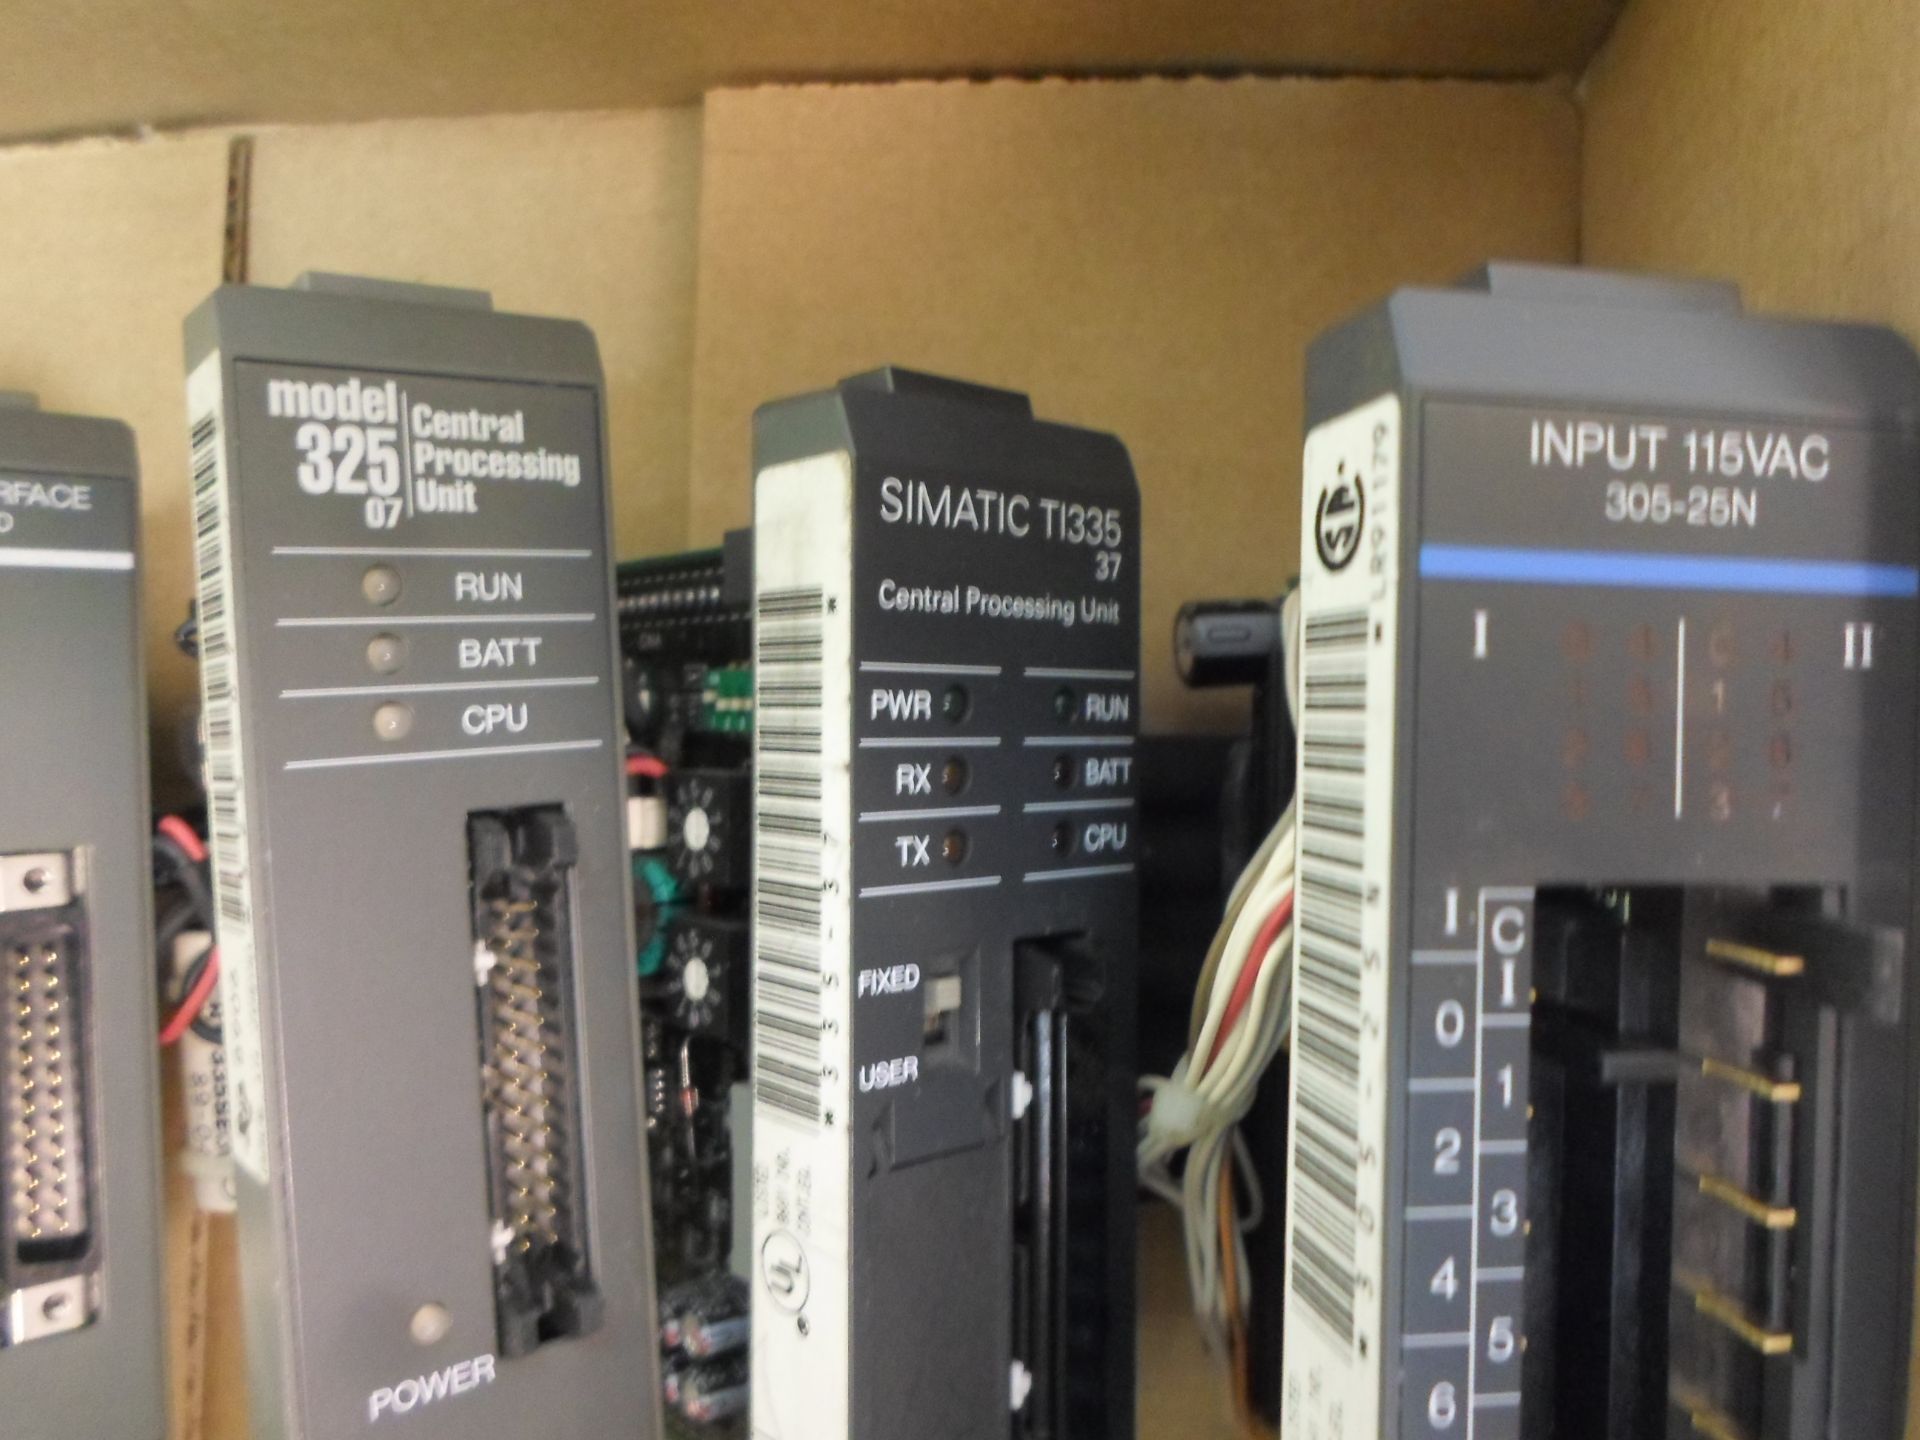 LOT OF FIVE (1) INPUT 115VAC 305-25N (1) MODEL325 CENTRAL PROCESSING UNIT CPU (1) T/W INTERFACE 305 - Image 3 of 3